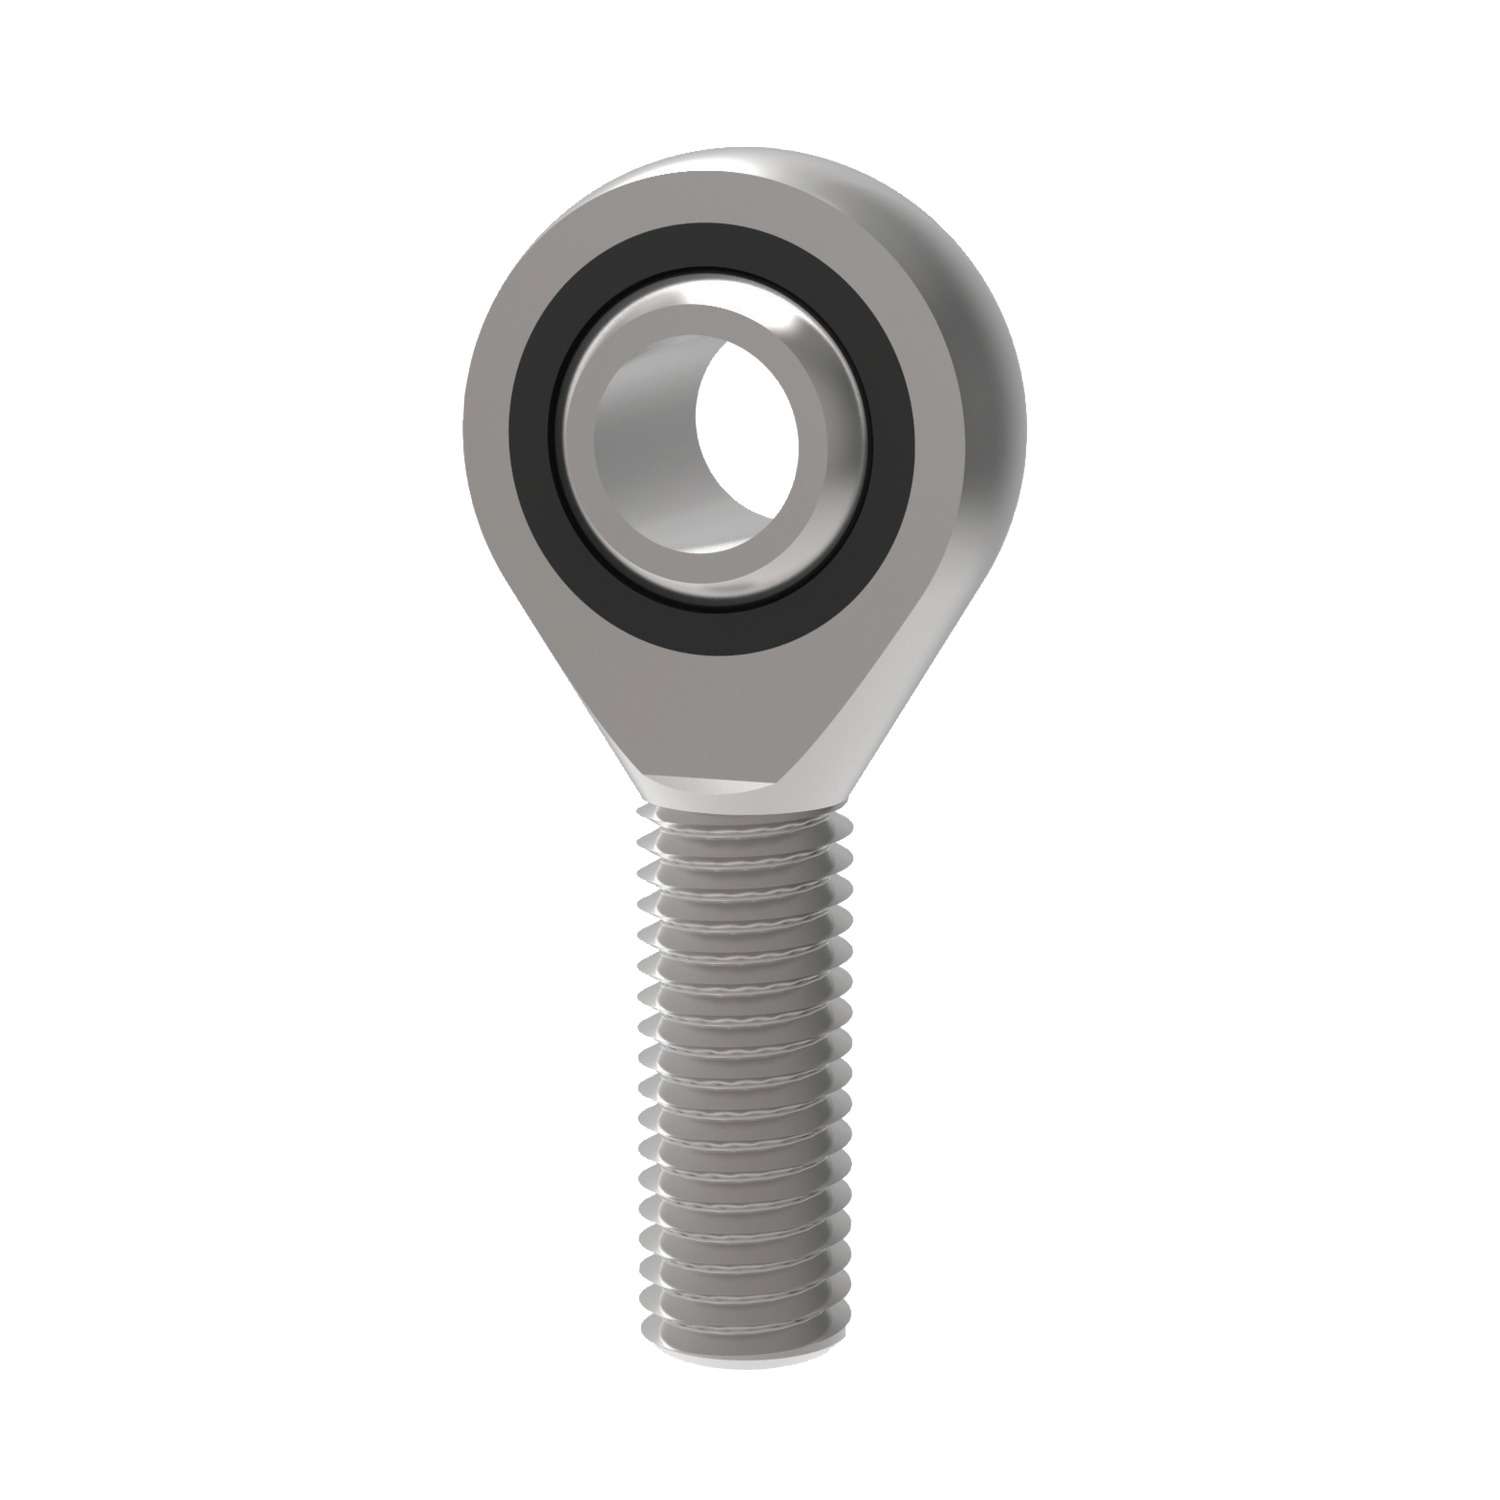 Low Cost Rod End - Male Male low cost rod ends with integral spherical plain bearing. Right and left hand threads in sizes from M6 to M80.